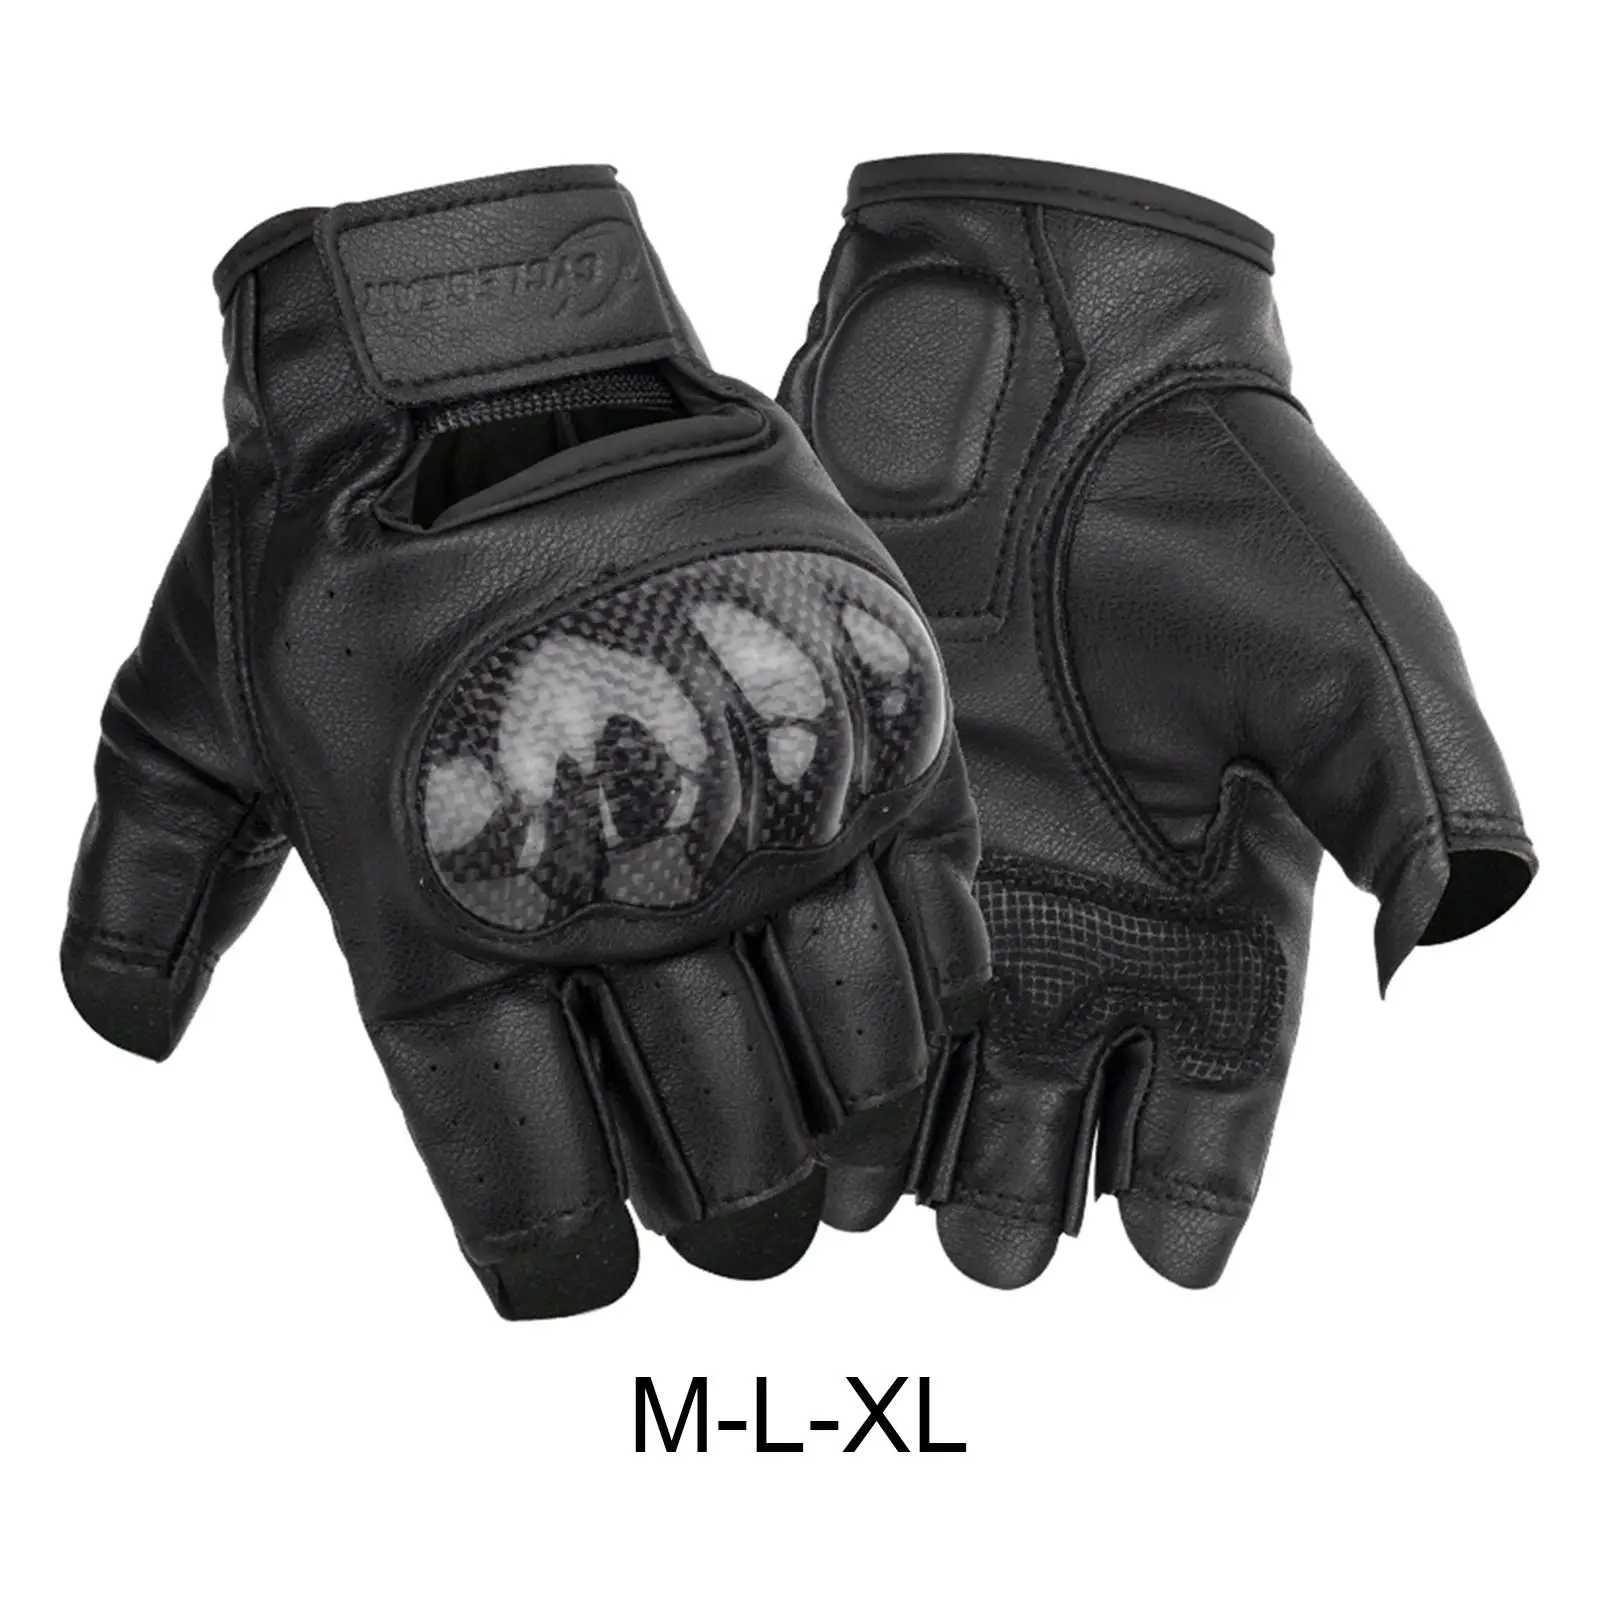 Motorcycle Gloves Half Finger PU Leather Fingerless with Carbon Fiber Protector Breathable Fit for Driving Riding Cycling